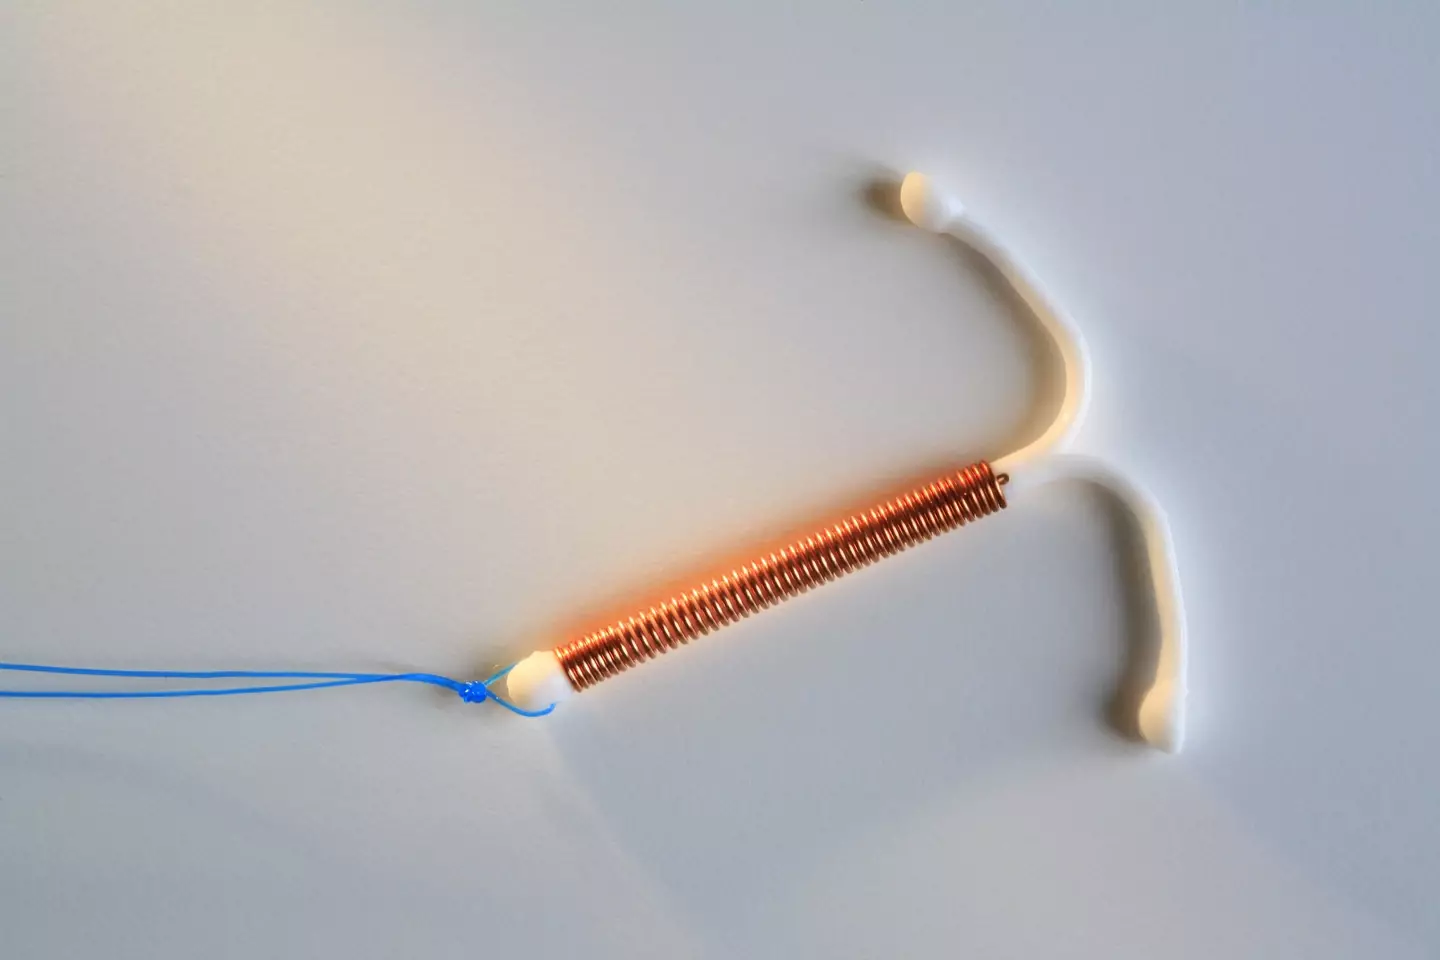 You should never attempt to remove an IUD yourself (